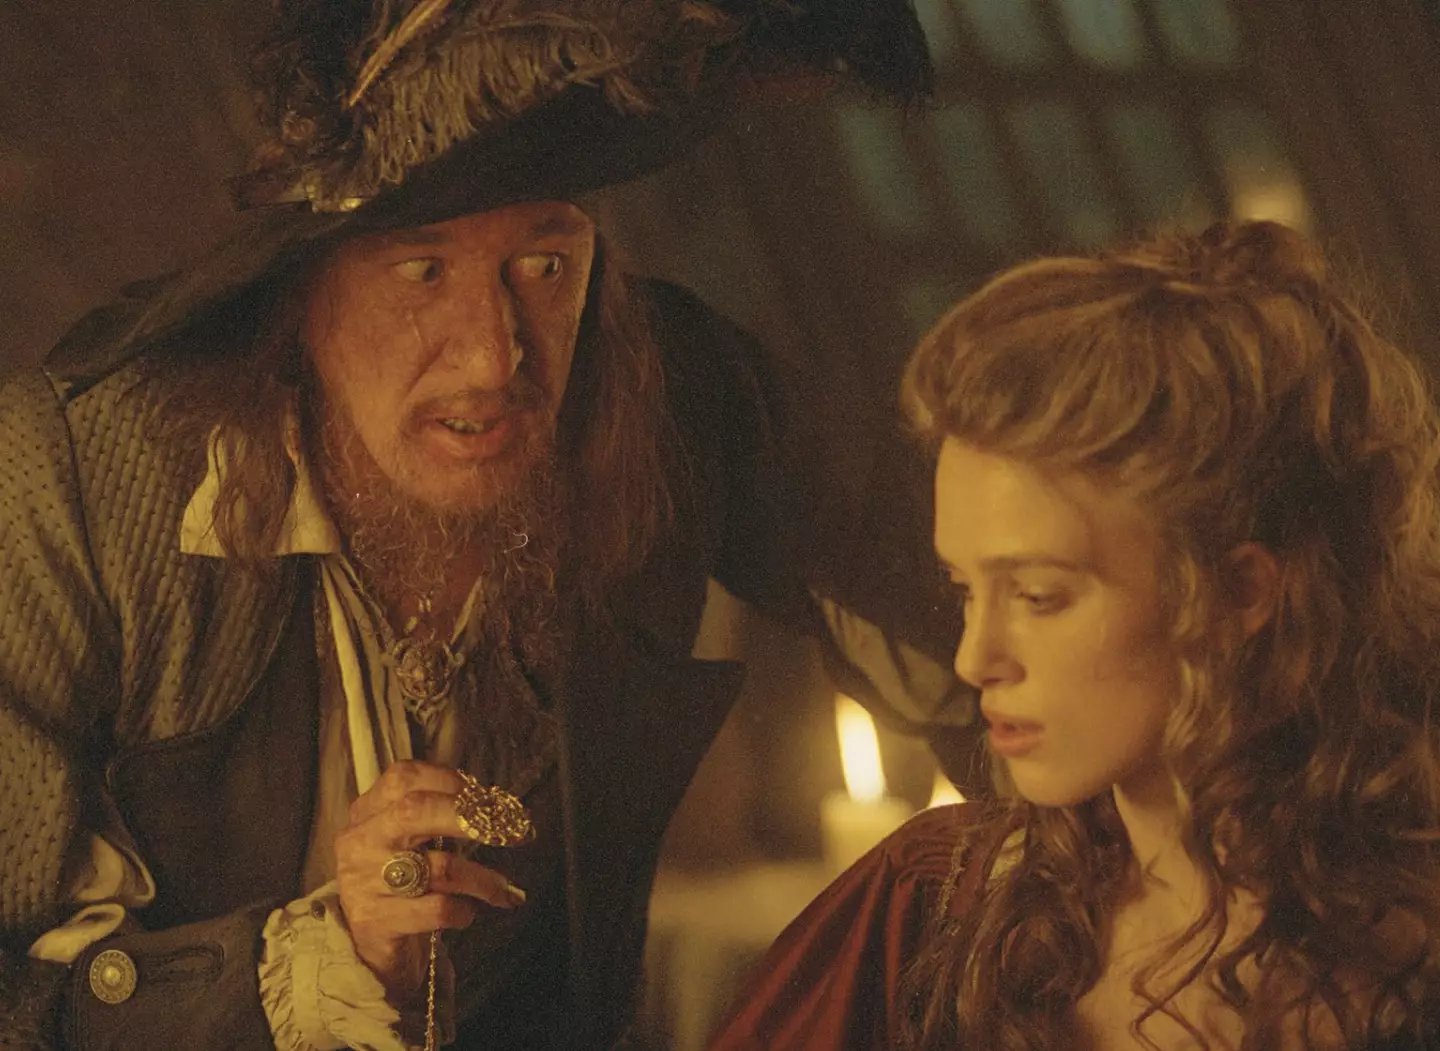 The actor played Elizabeth Swann in the film franchise. (Disney)